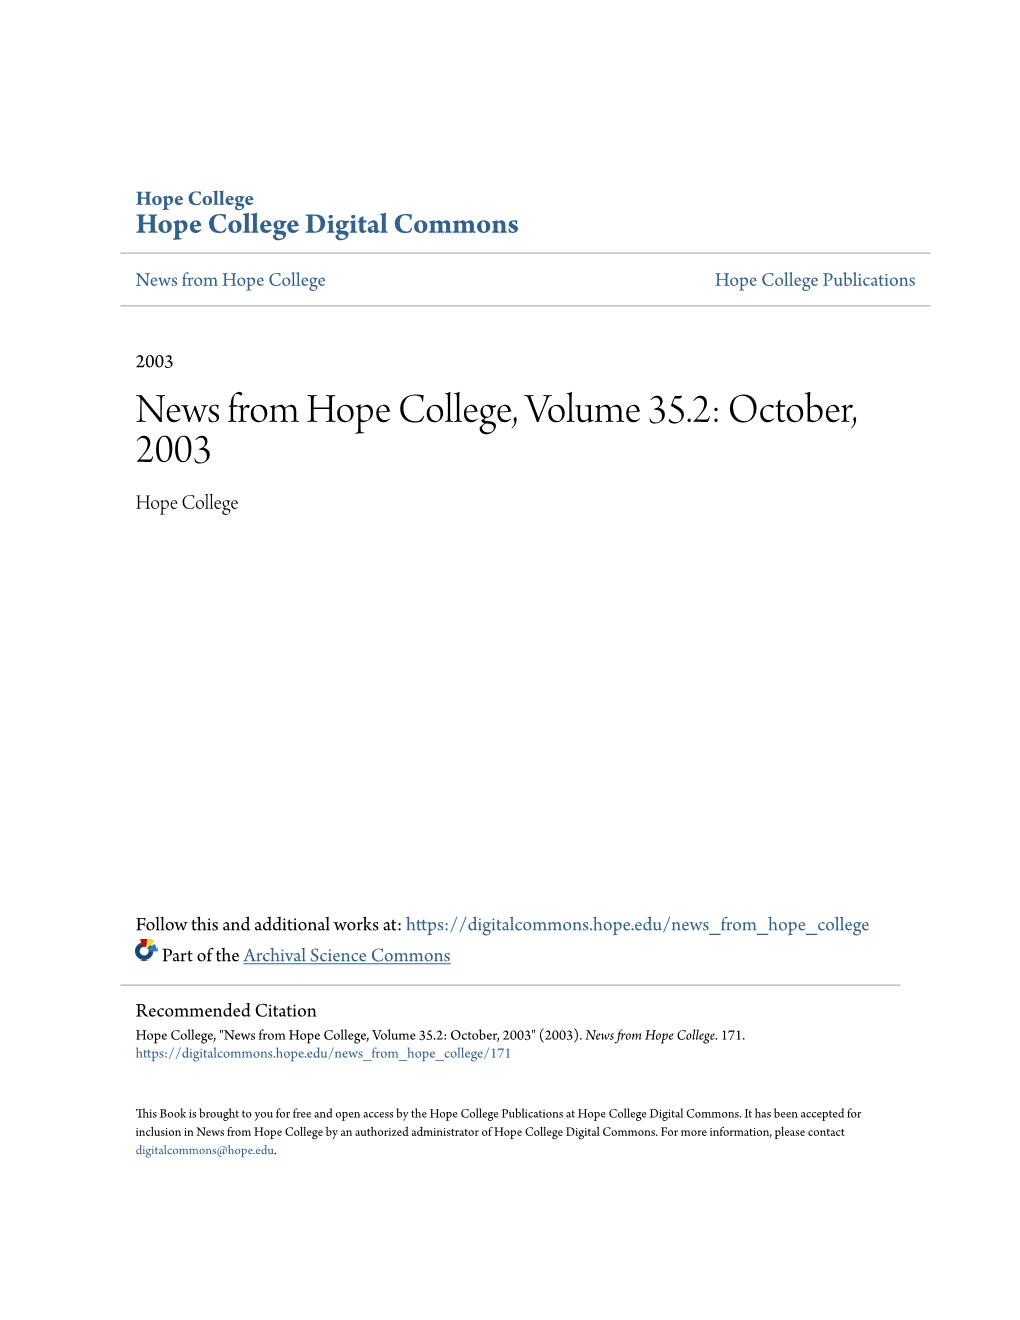 News from Hope College, Volume 35.2: October, 2003 Hope College